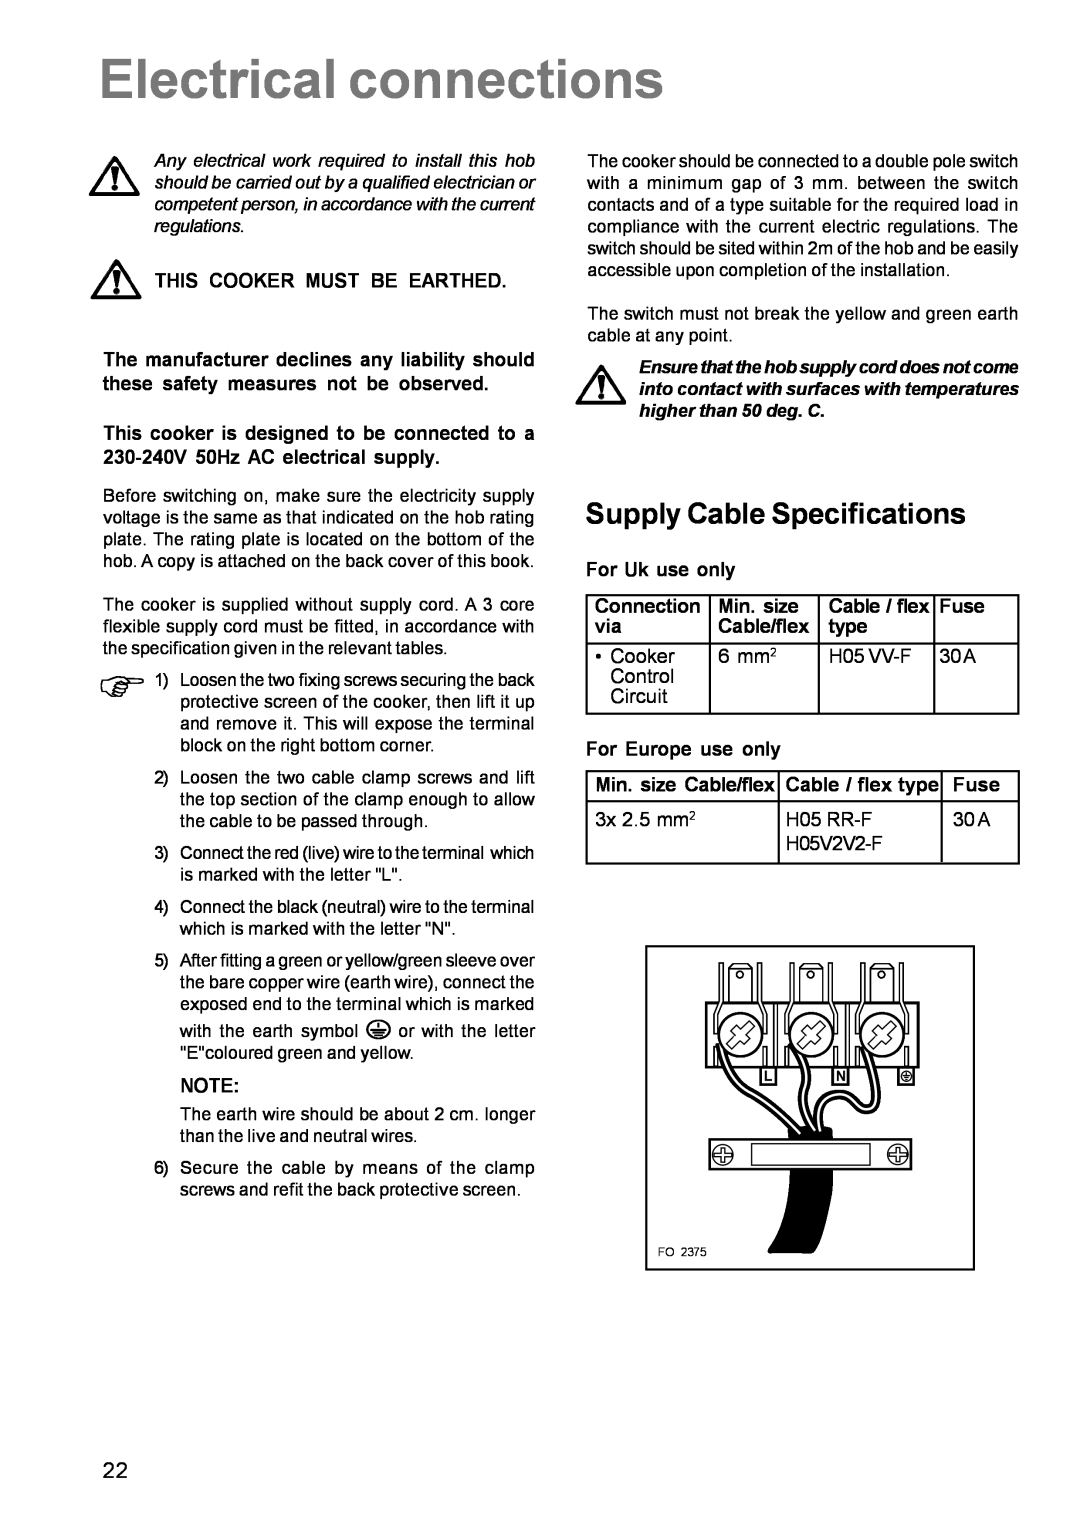 Zanussi ZCE 631 manual Electrical connections, Supply Cable Specifications 